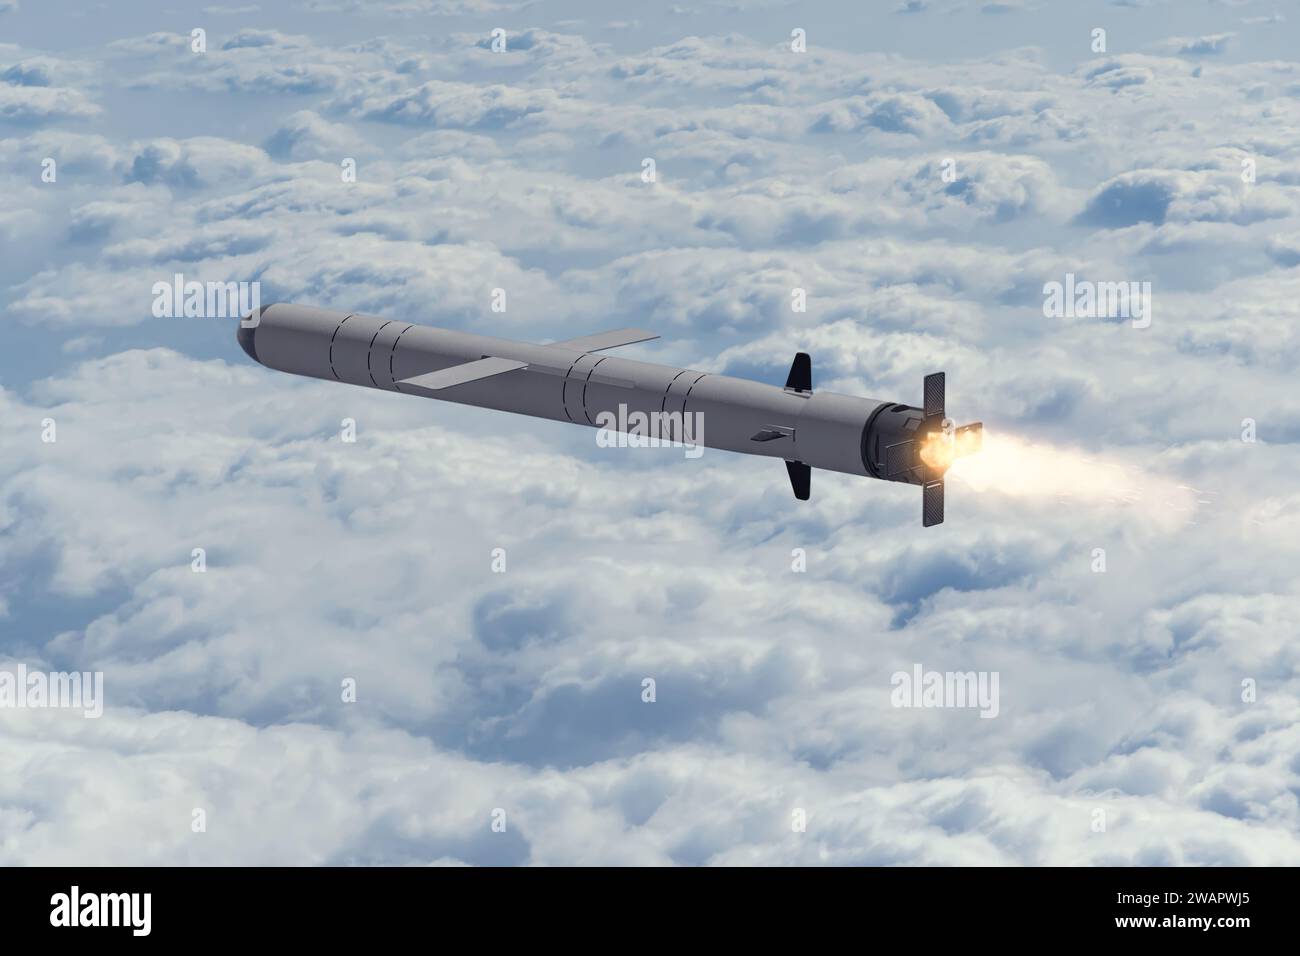 Russian cruise missile "Kalibr" flies above the clouds, smoke and fire from the nozzle of the missile. Concept: war in Ukraine, Russian missile attack Stock Photo